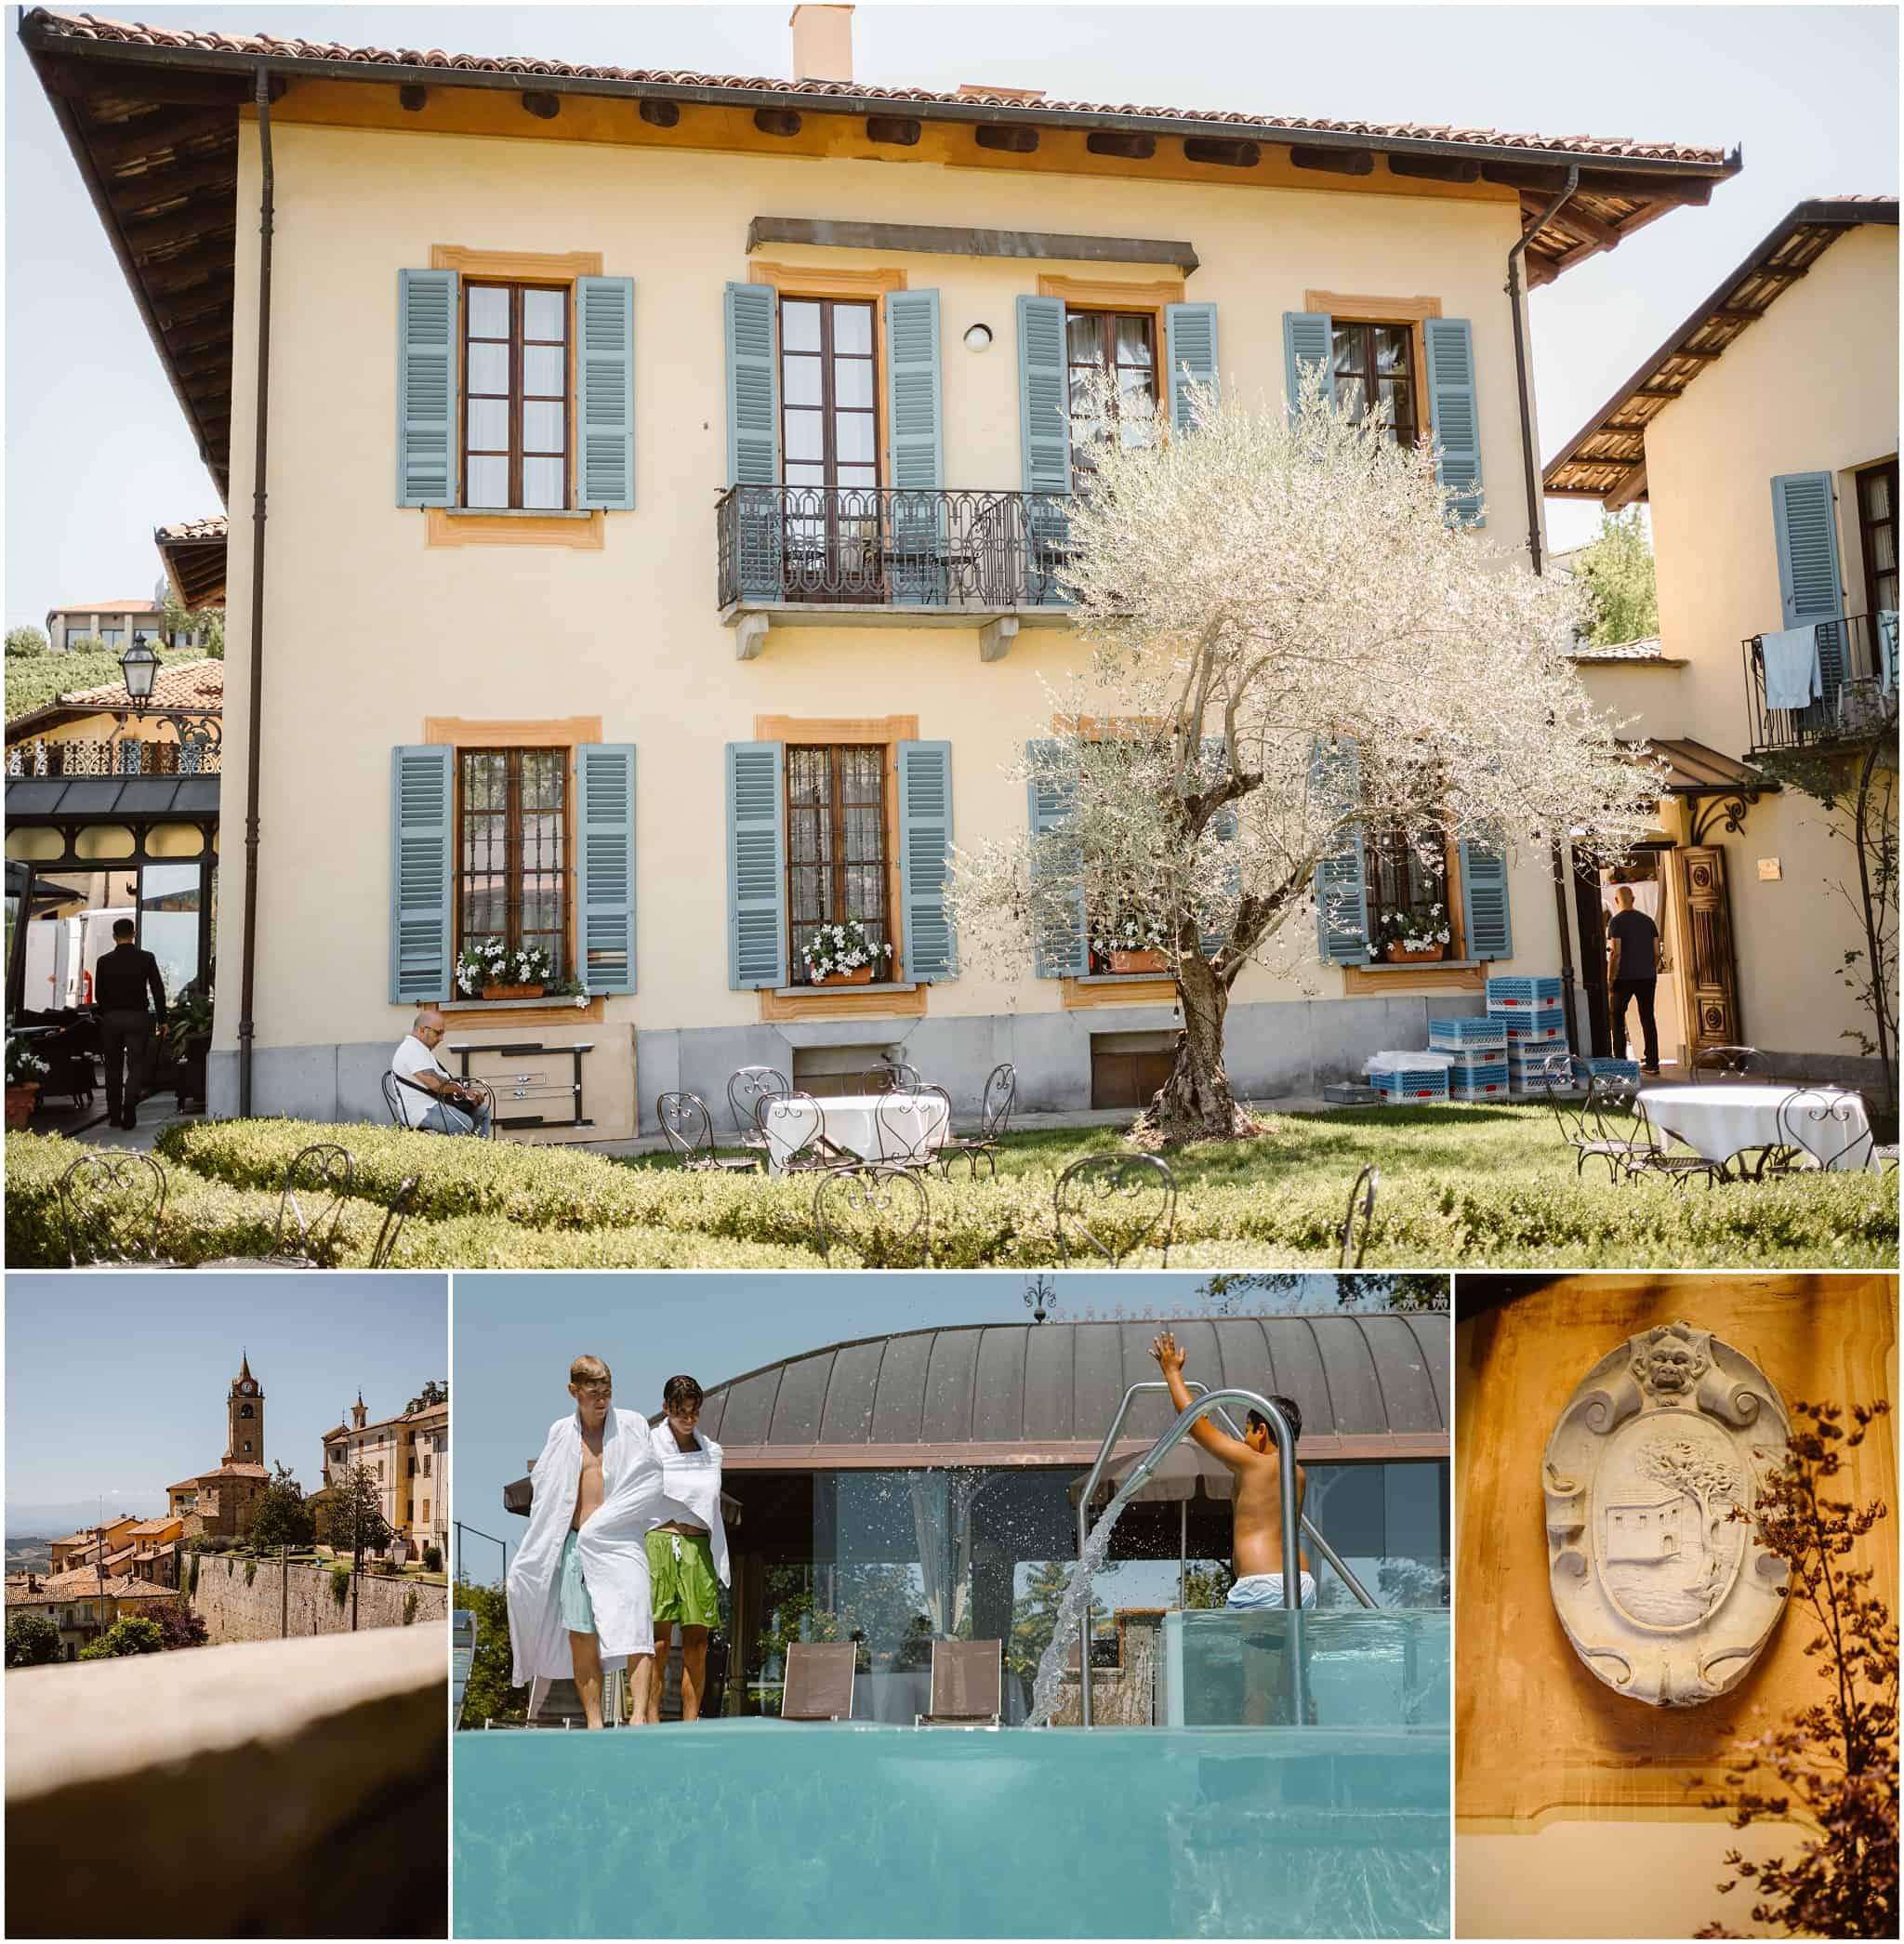 Villa Beccaris wedding: pictures of the villa, the pool and the landscape.